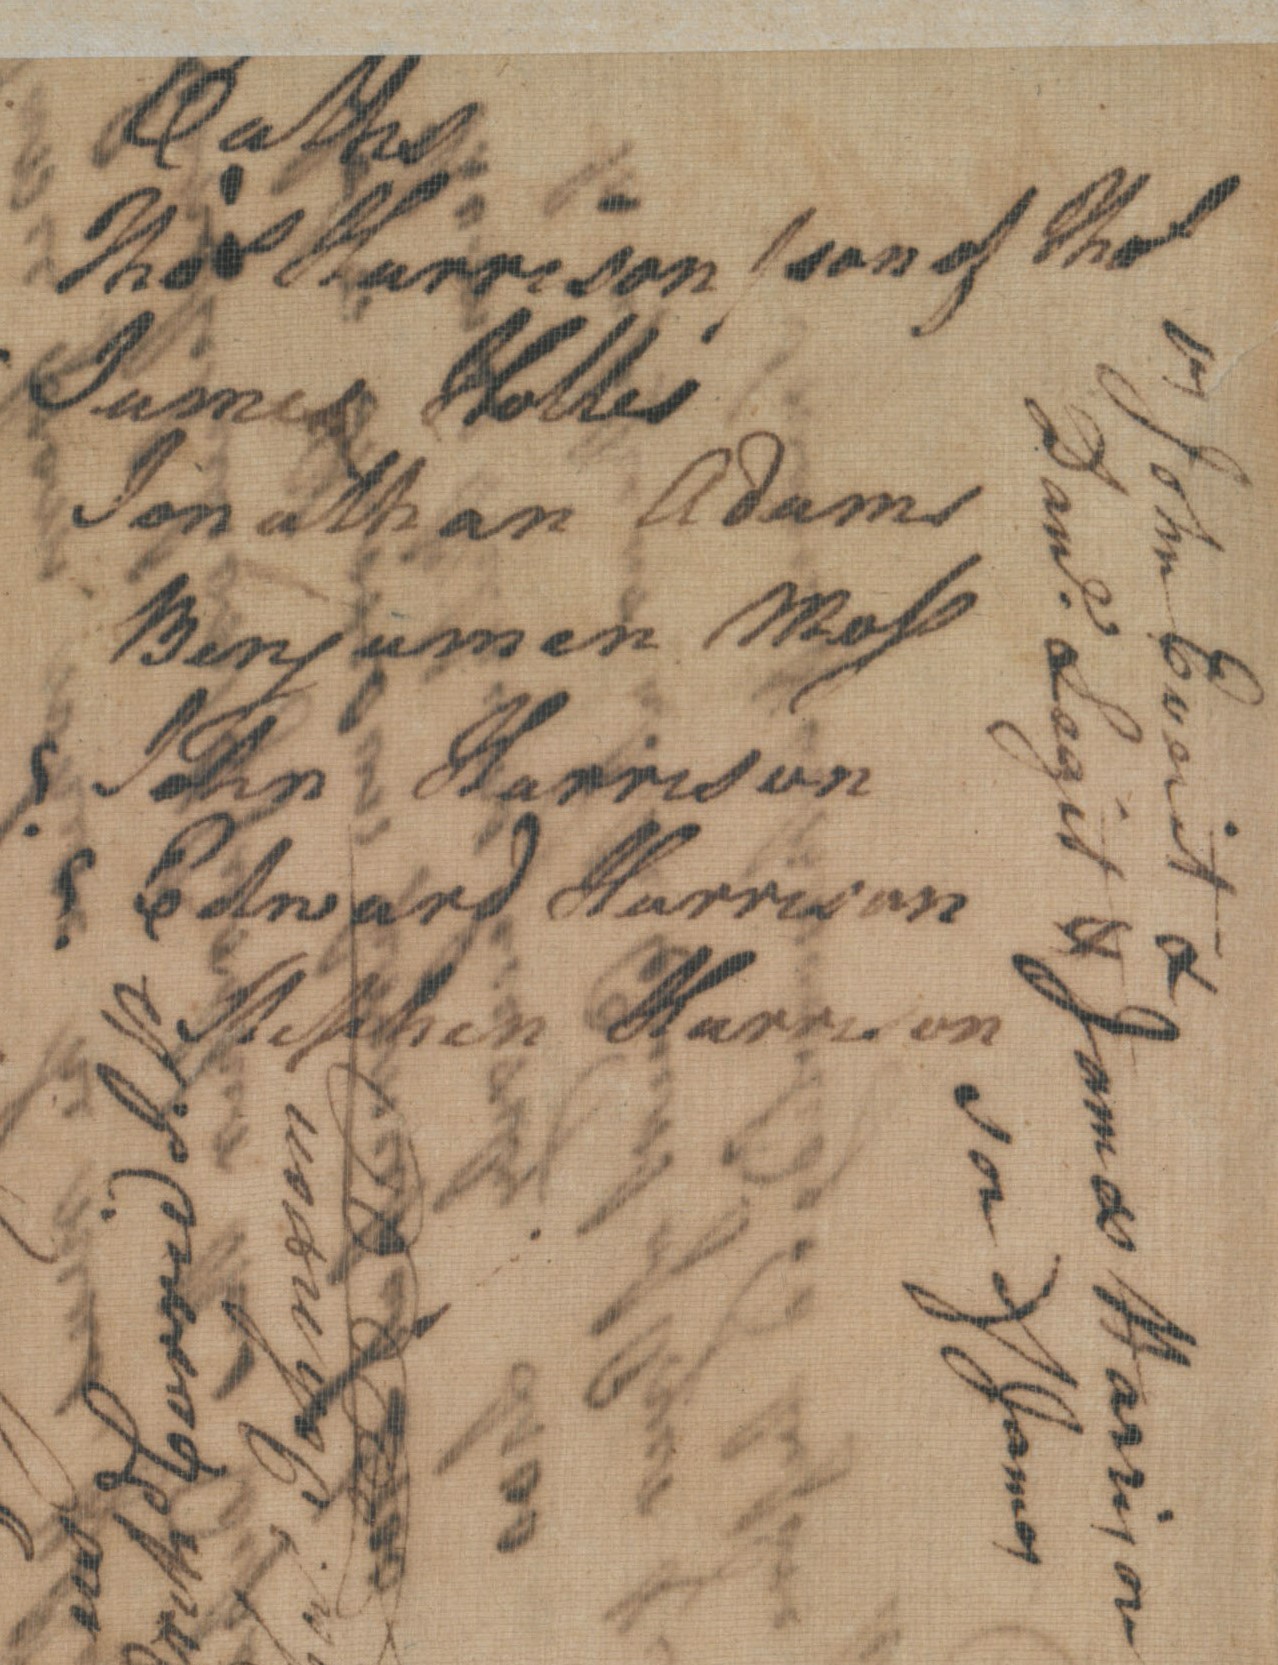 Deposition of Thomas Harrison Jr., 16 July 1777, page 2